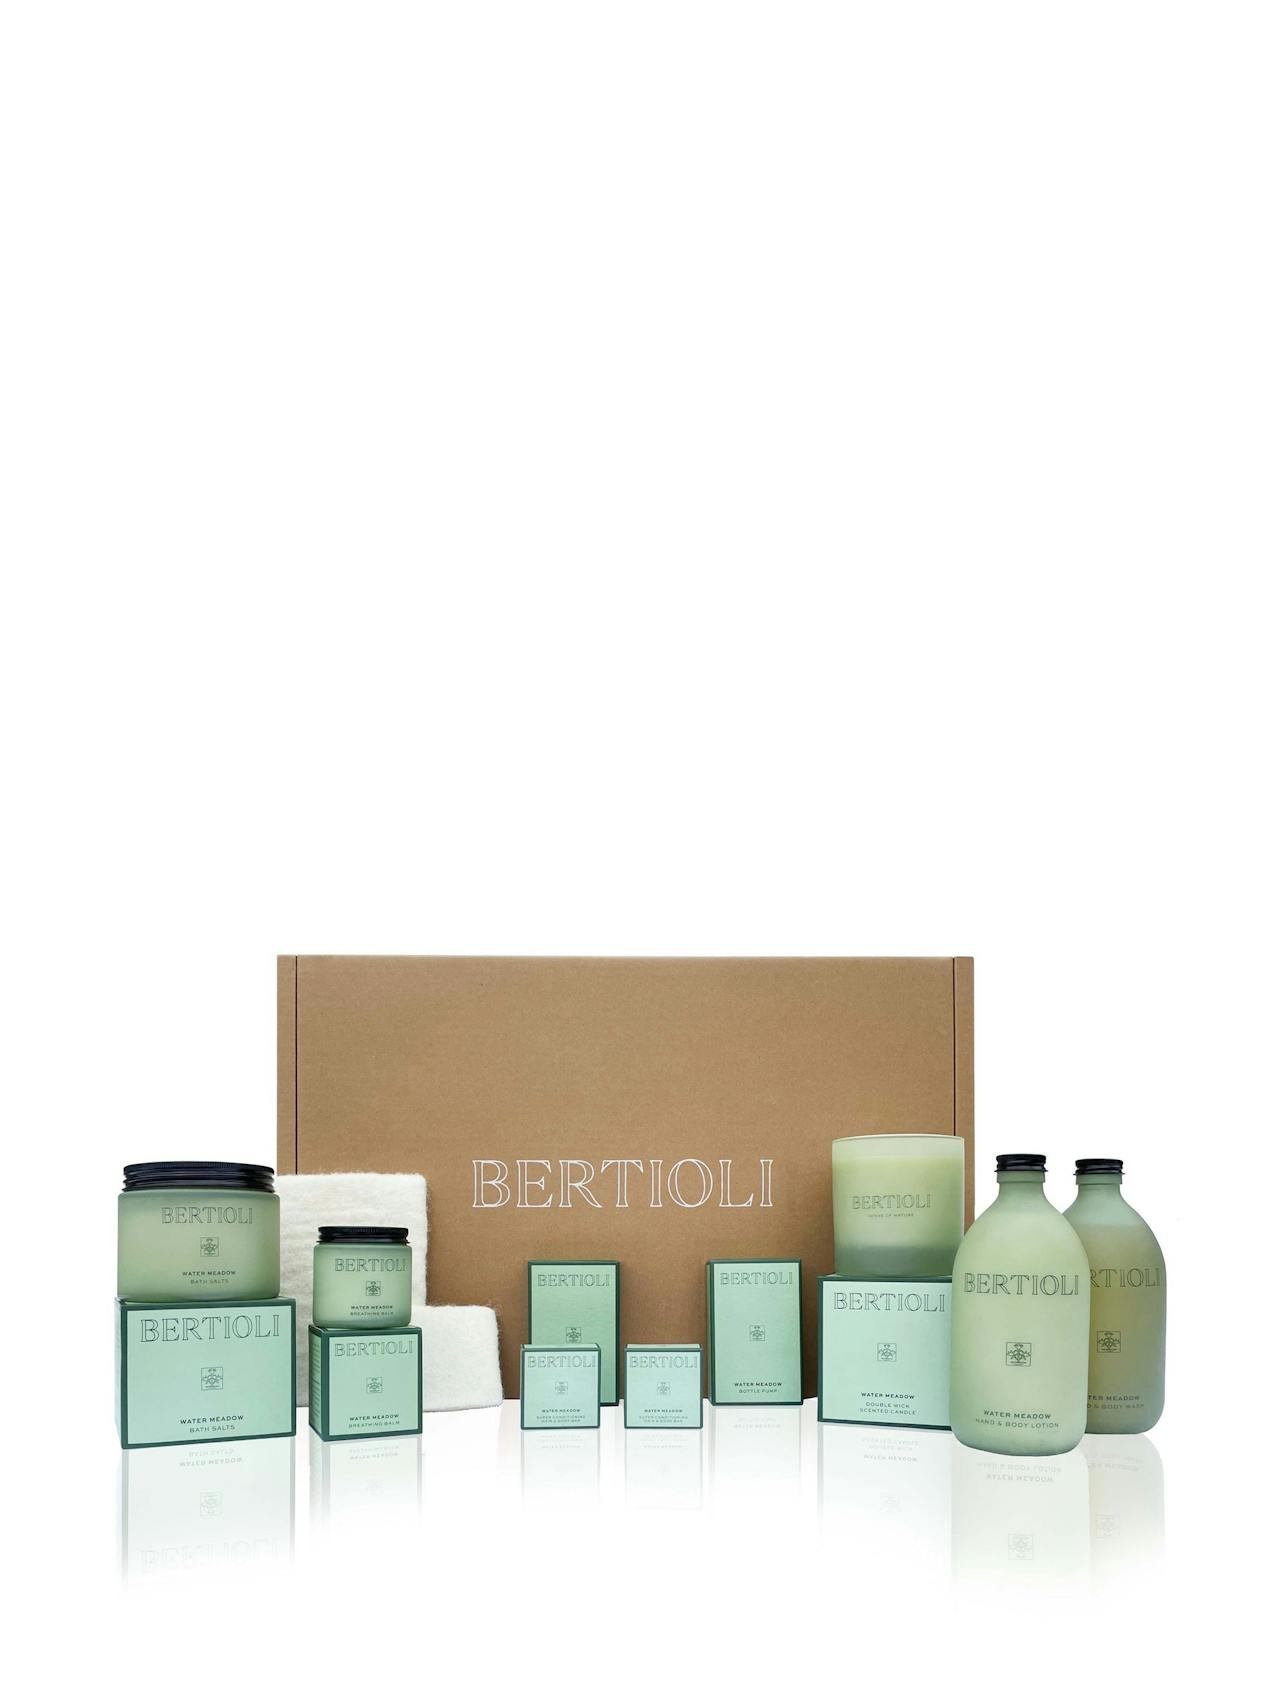 The complete Bertioli breathing and bathing collection